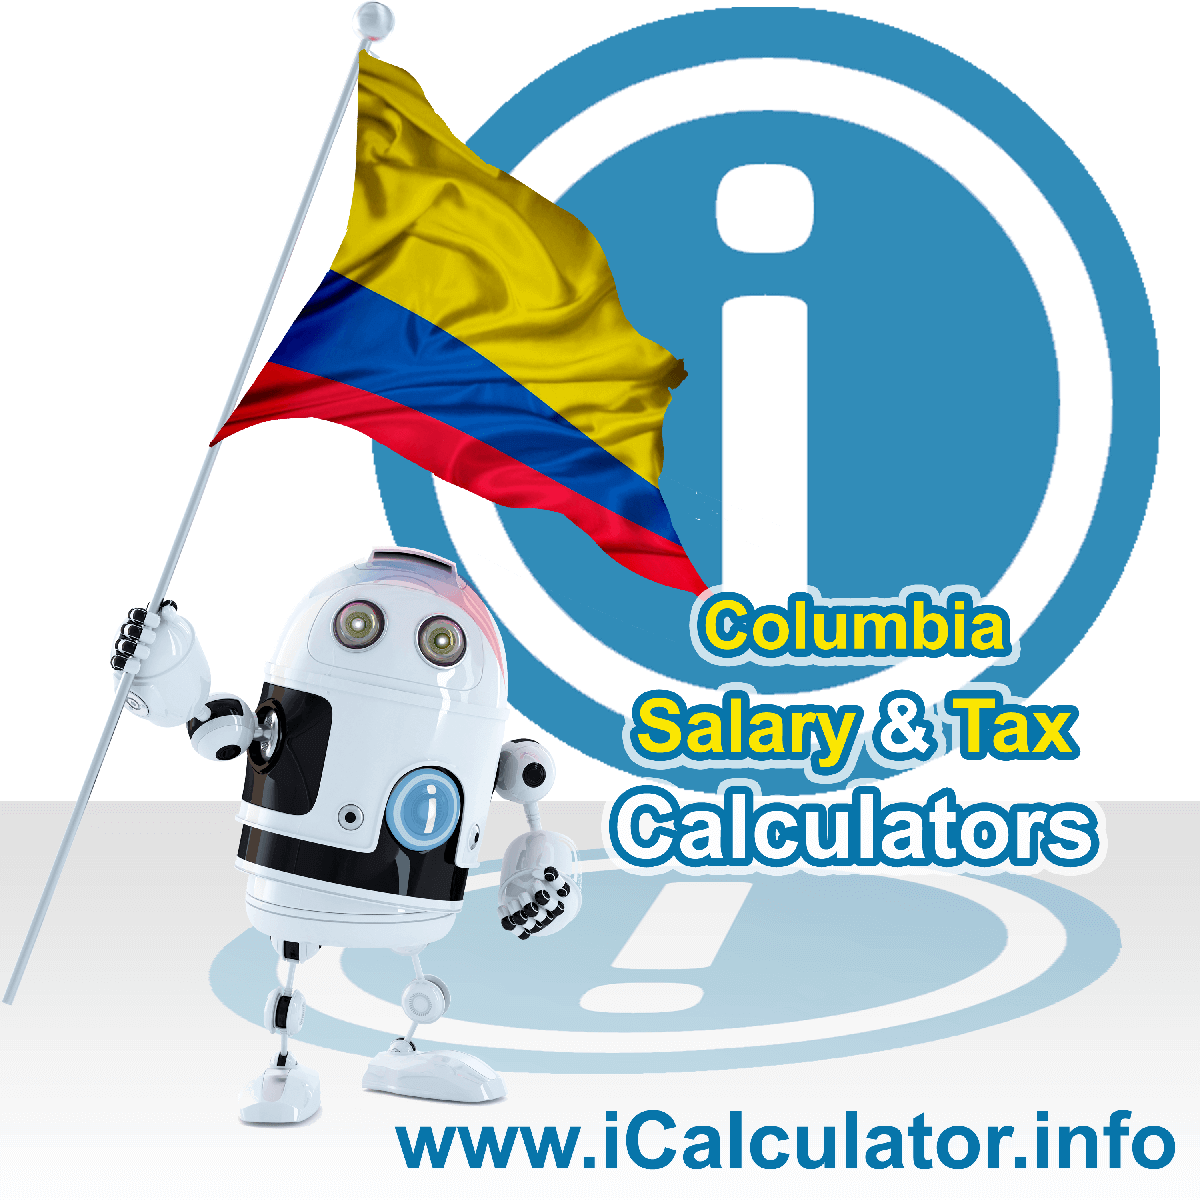 Colombia Salary Calculator. This image shows the Colombiaese flag and information relating to the tax formula for the Colombia Tax Calculator